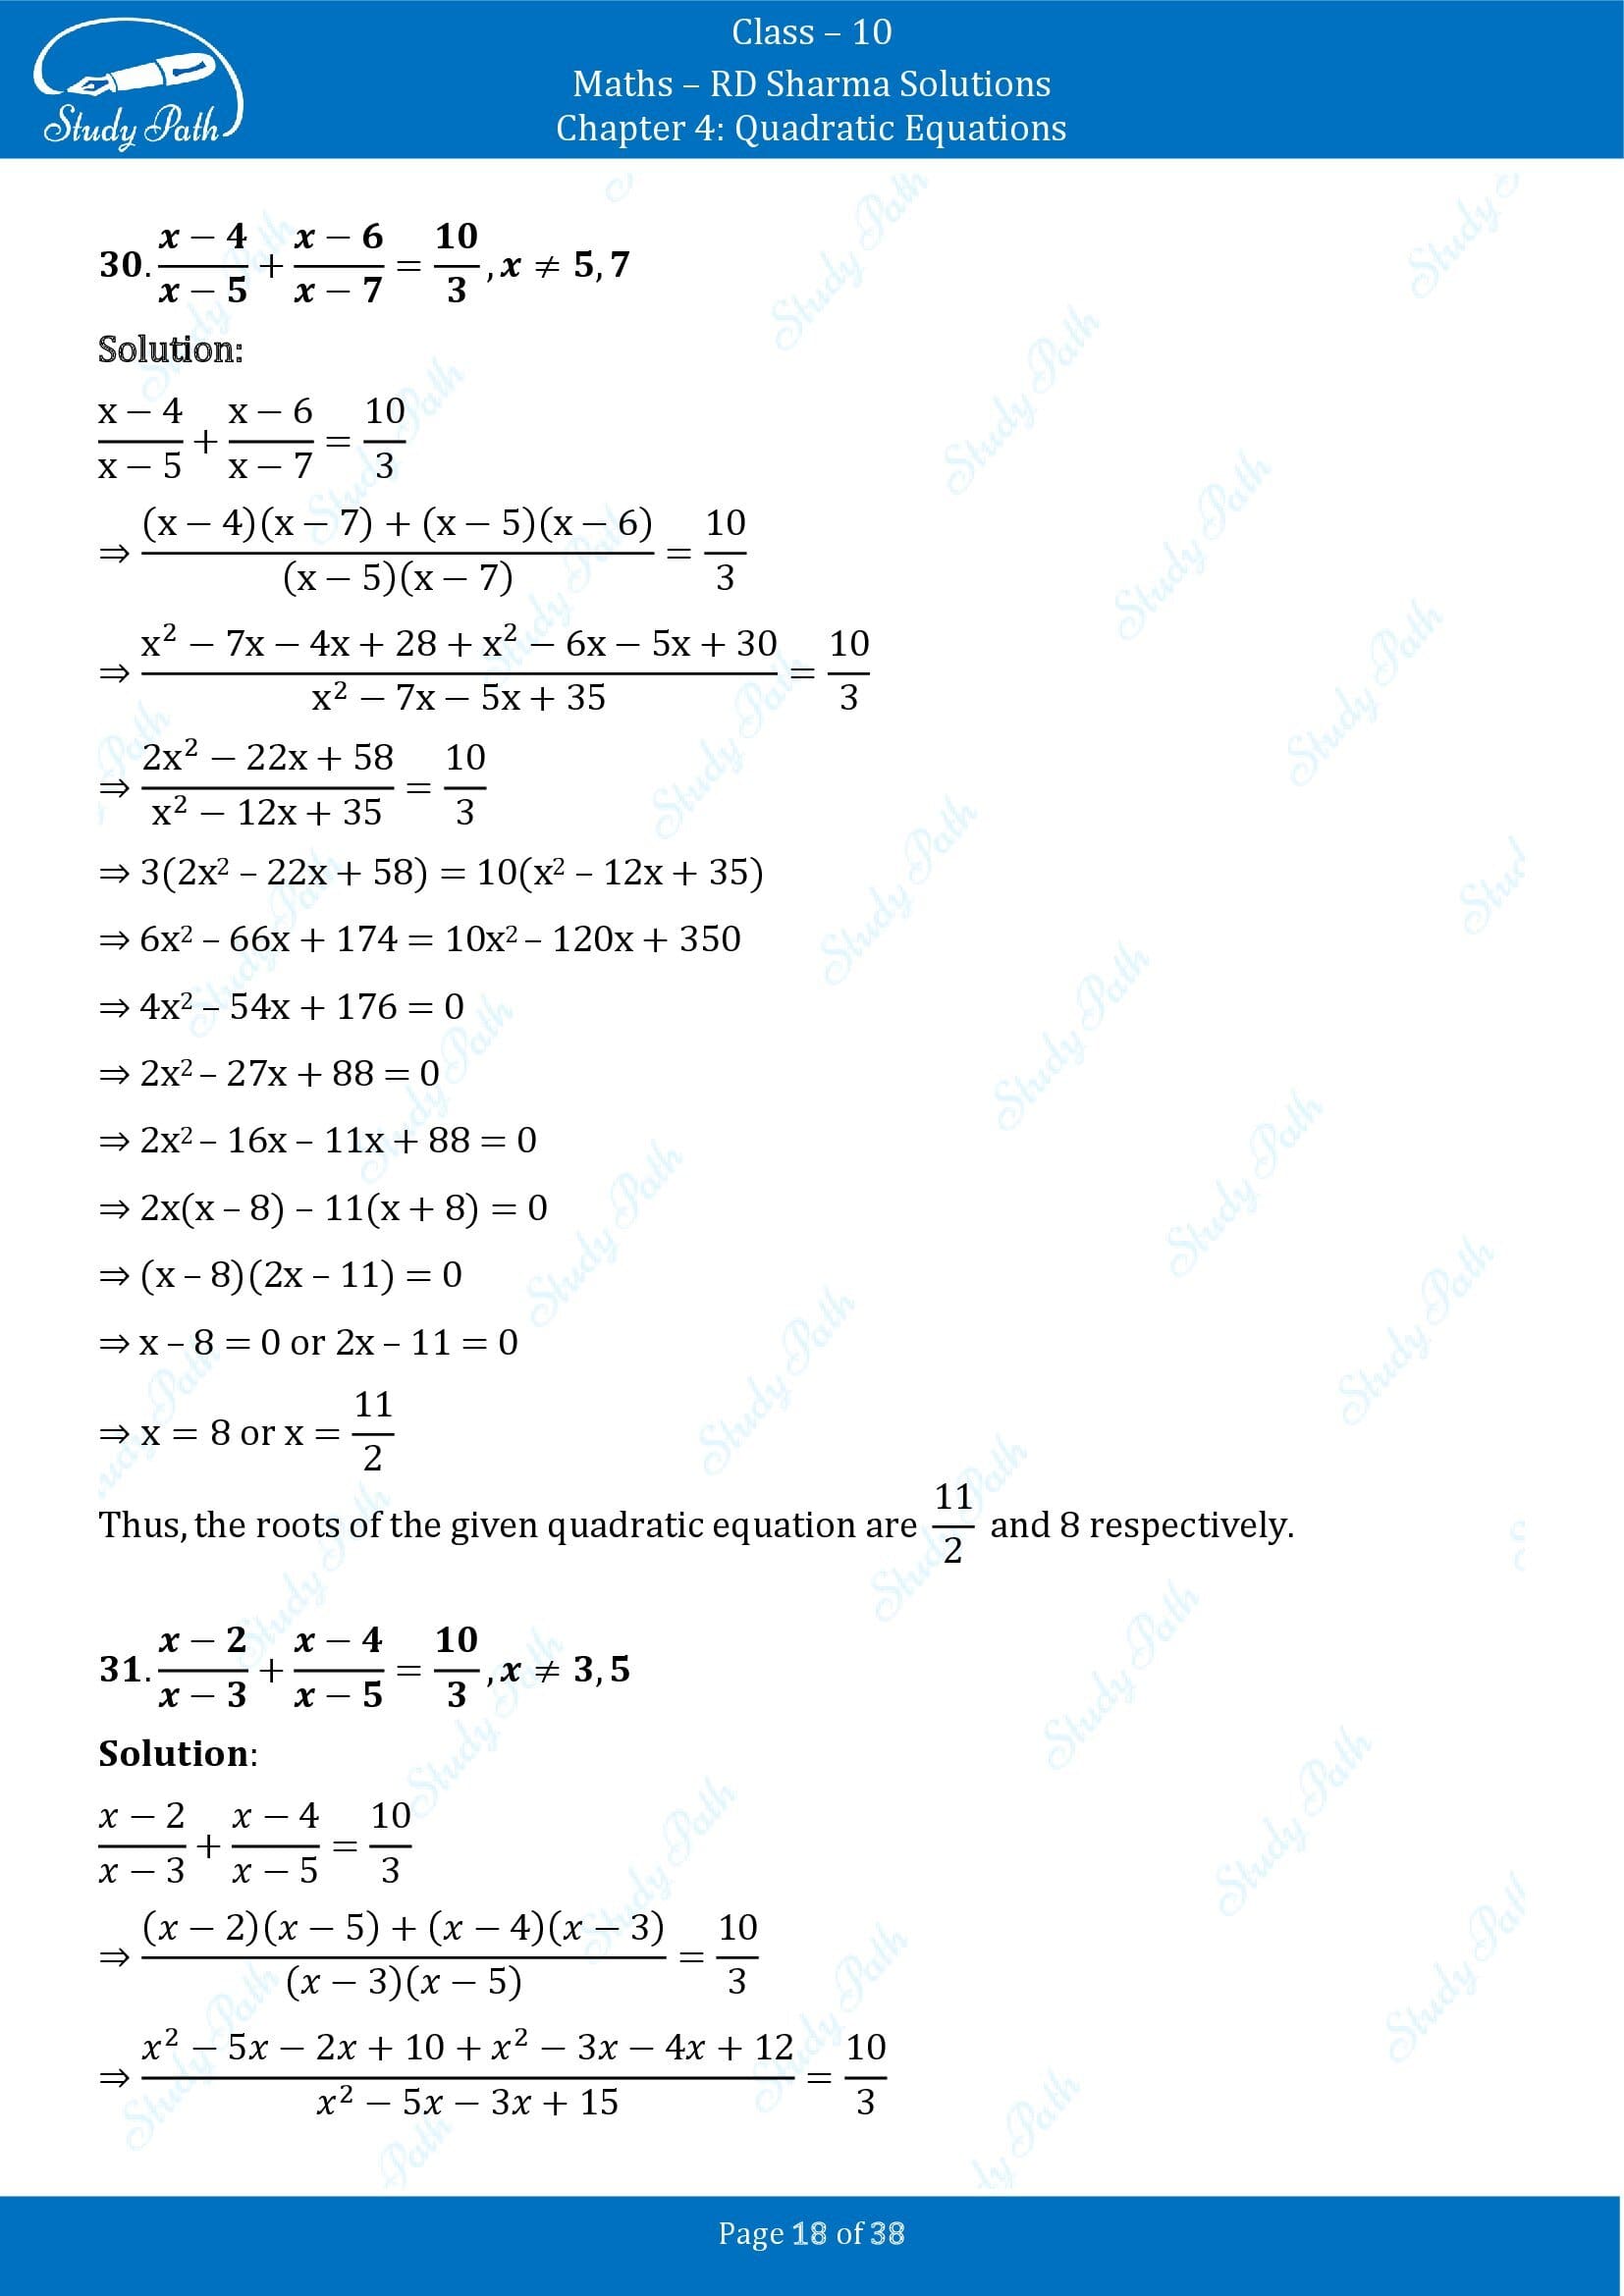 RD Sharma Solutions Class 10 Chapter 4 Quadratic Equations Exercise 4.3 00018